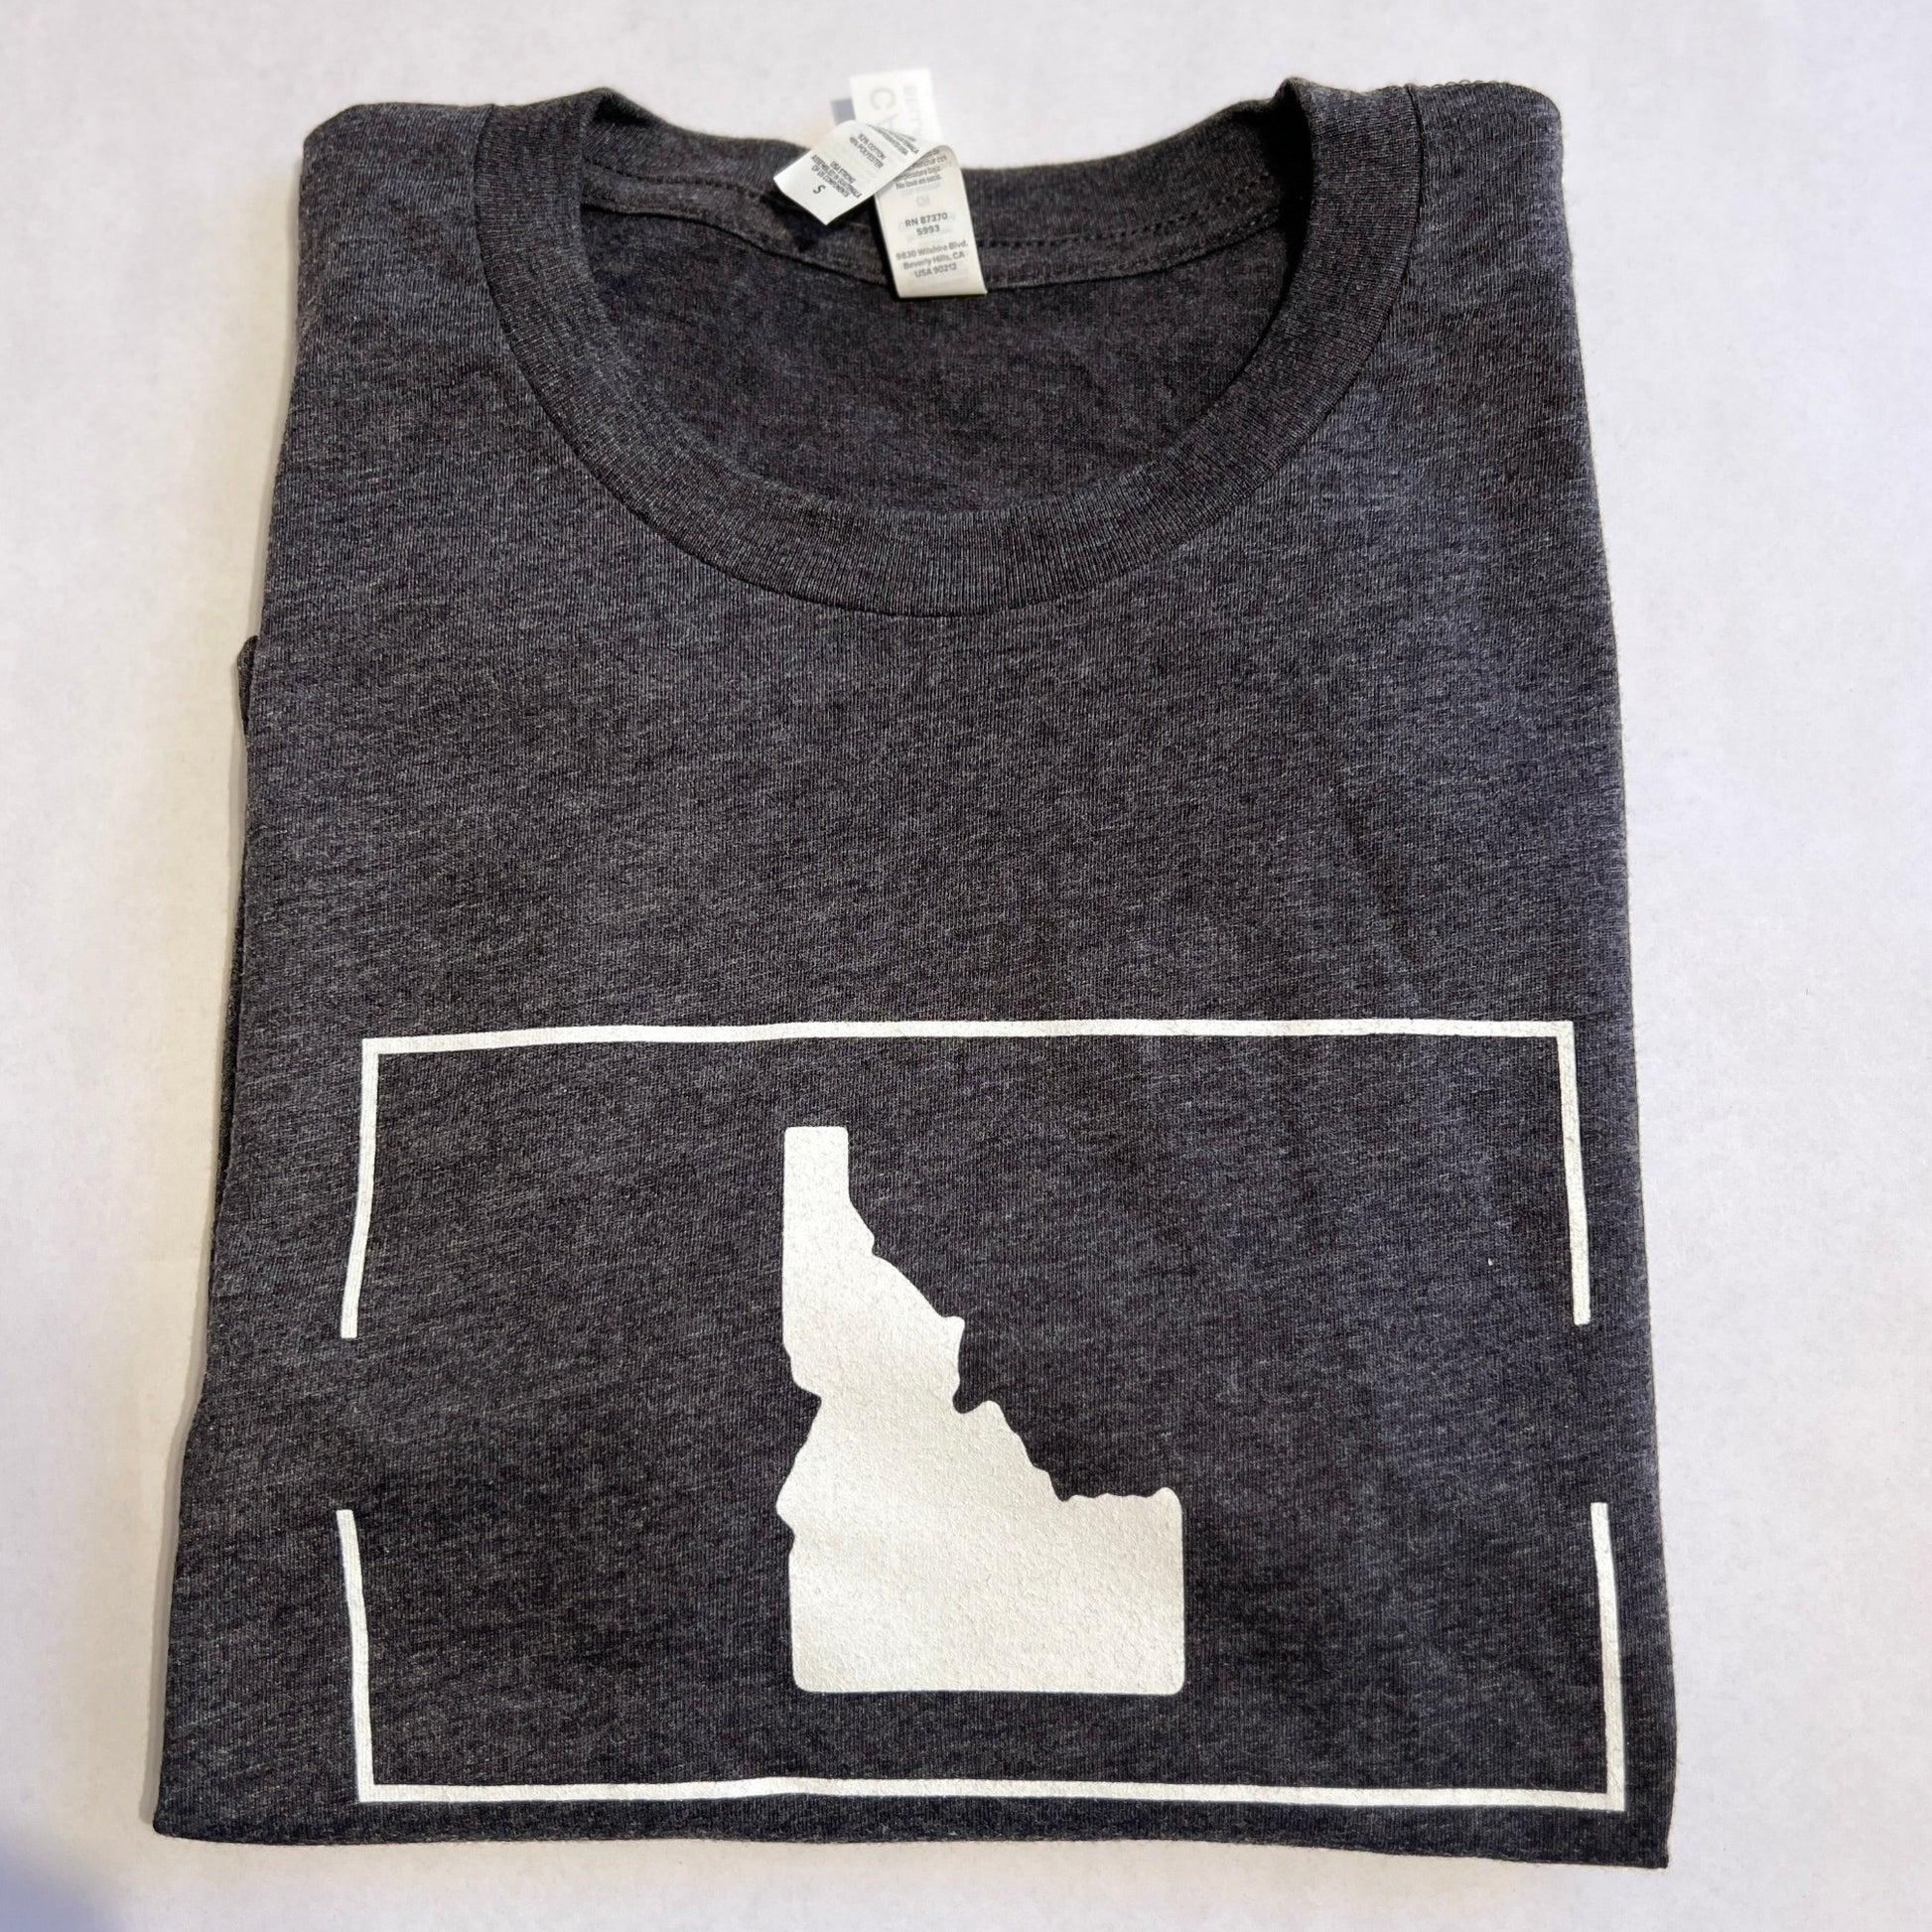 This Idaho T Shirt is designed in Idaho by TatorJo, an Idaho Apparel Company. The T shirt has Idaho on it with a simple and classic design. This Idaho T Shirt can be dressed up and dressed down. It is a unisex t shirt, gray, with a white Idaho on it. This t shirt is cotton and polyester and ultra soft and comfortable. All t shirts are screen printed in Idaho. 